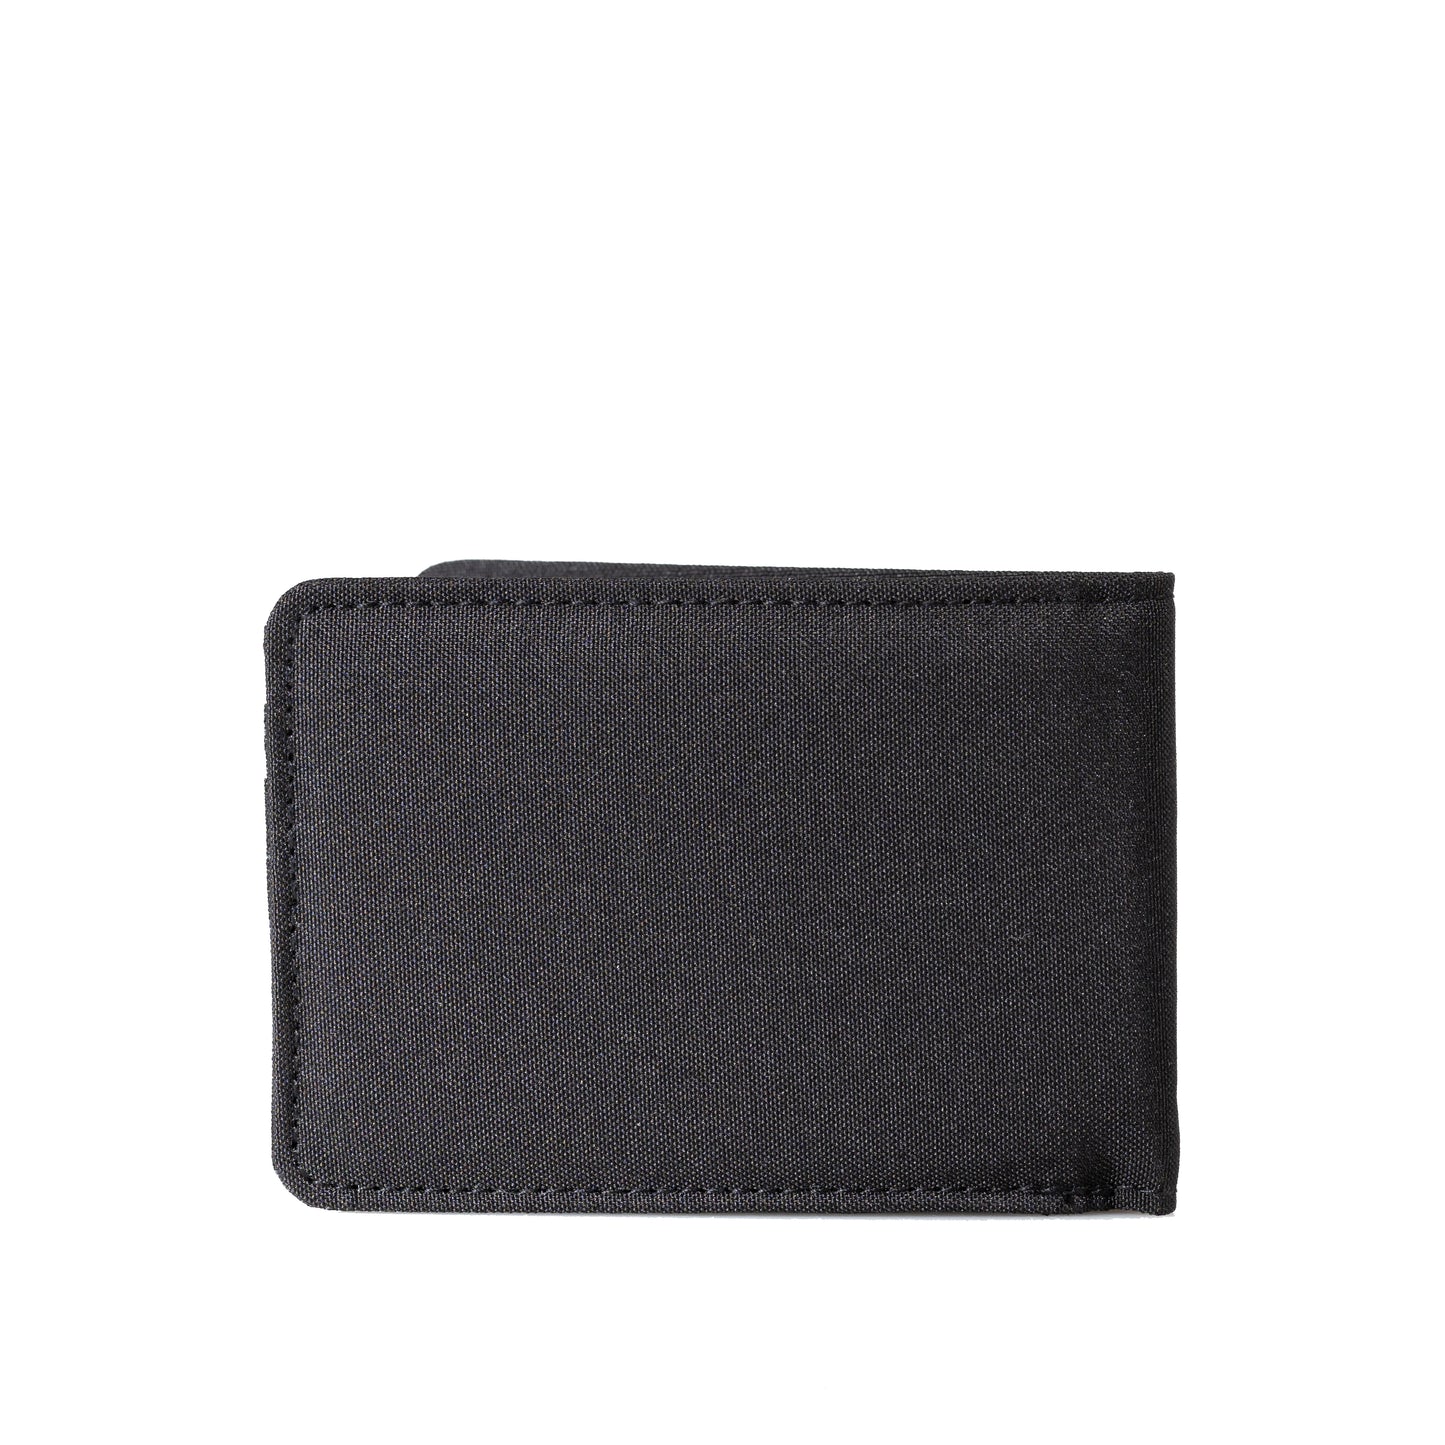 Champion Graphic Bifold Wallet Slim Design with Ample Storage 6 Card Slots, 2 Slip Pockets, and 1 Currency Compartment Iconic Champion "C" Patch on Front Interior Logo Print Detail and Textile Lining